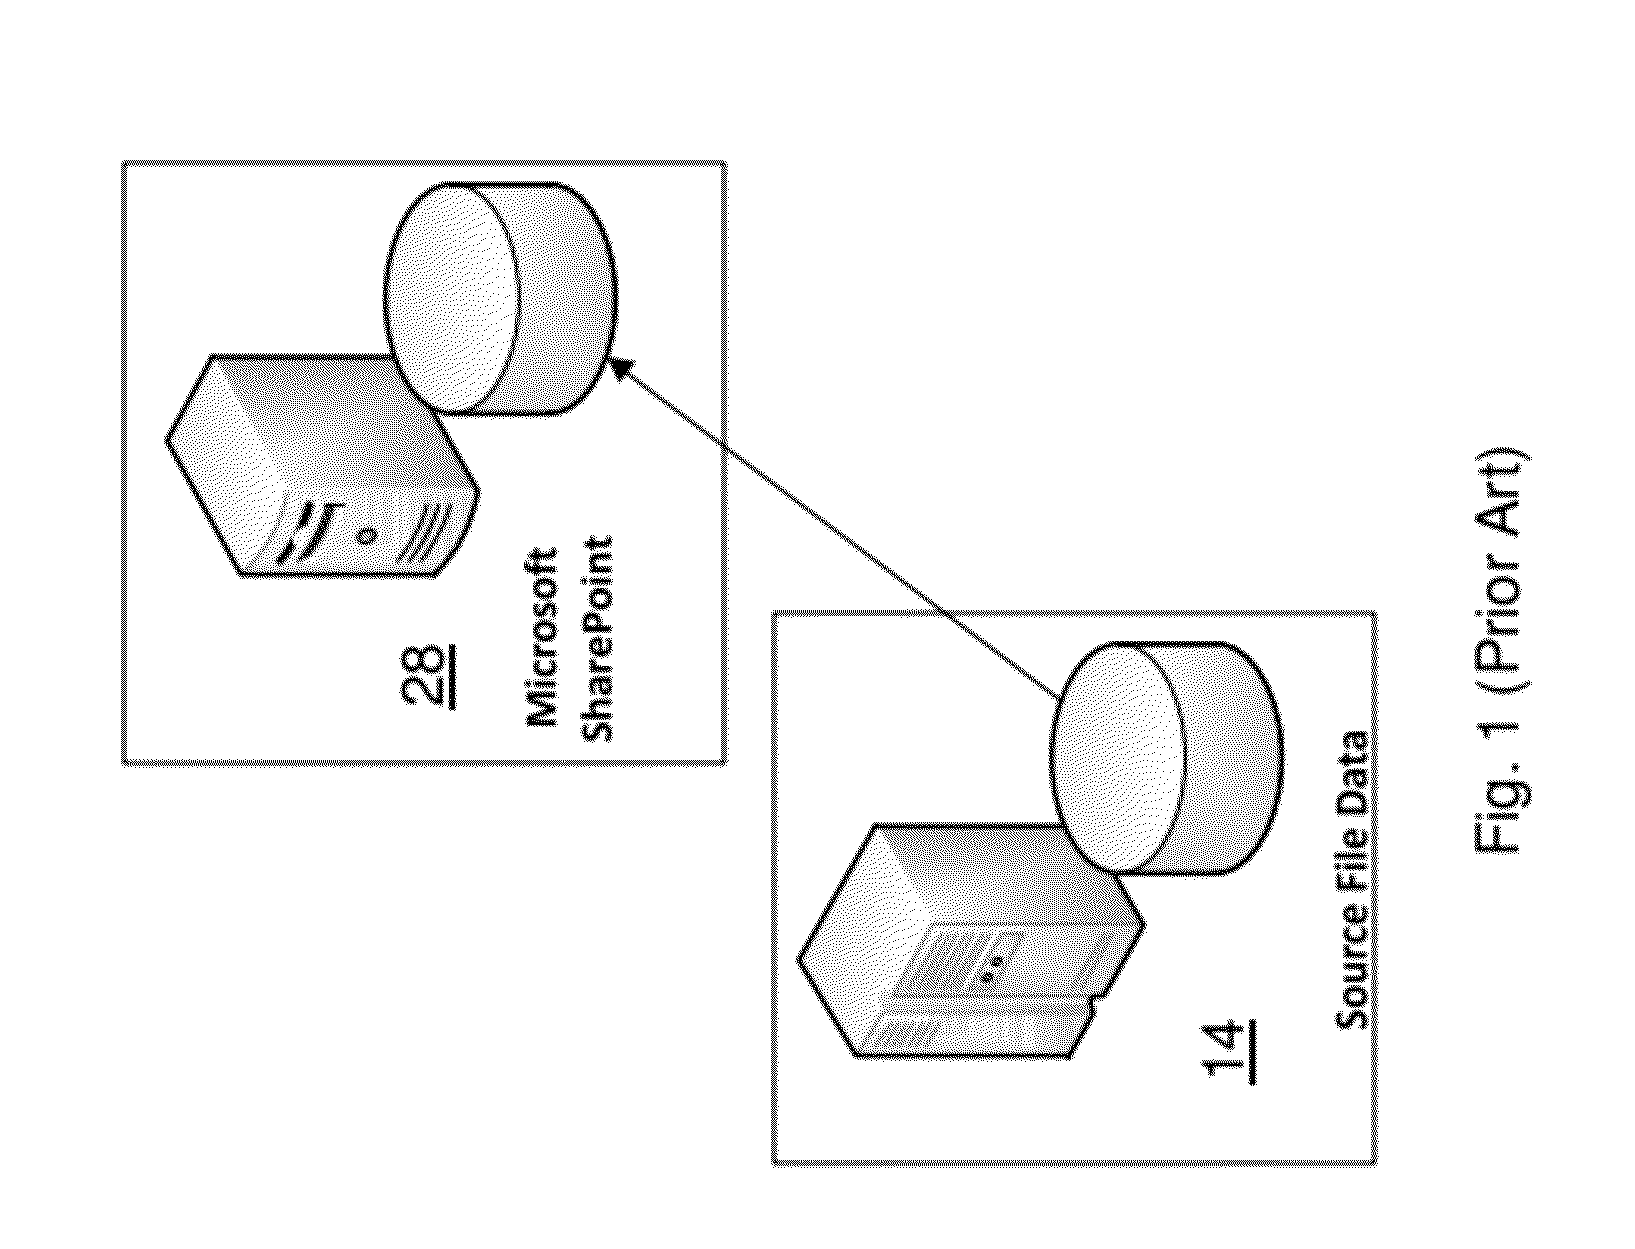 System and Method for In-Place Data Migration